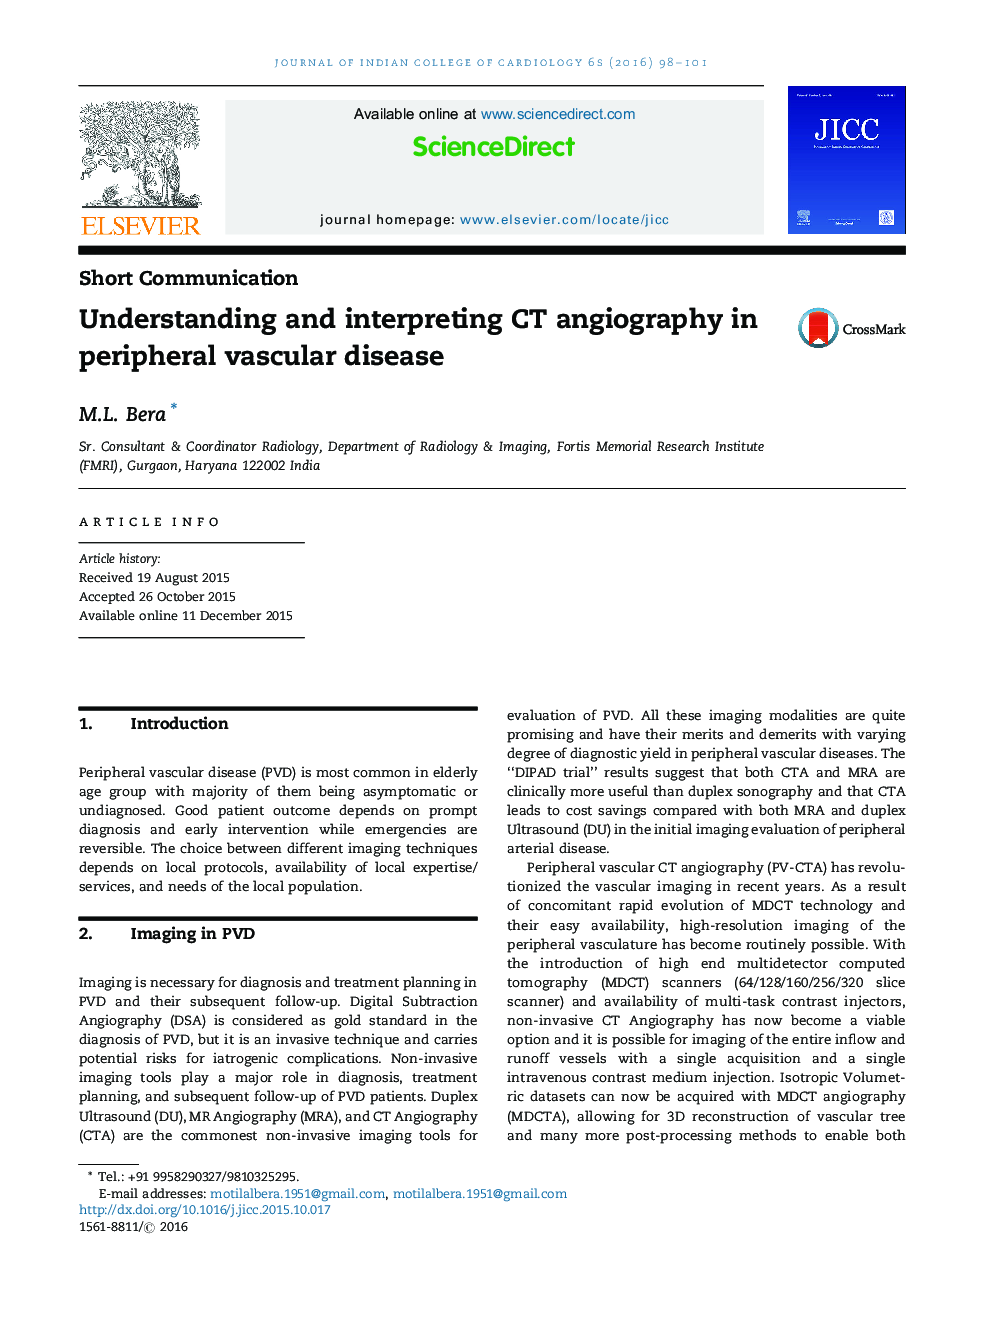 Understanding and interpreting CT angiography in peripheral vascular disease